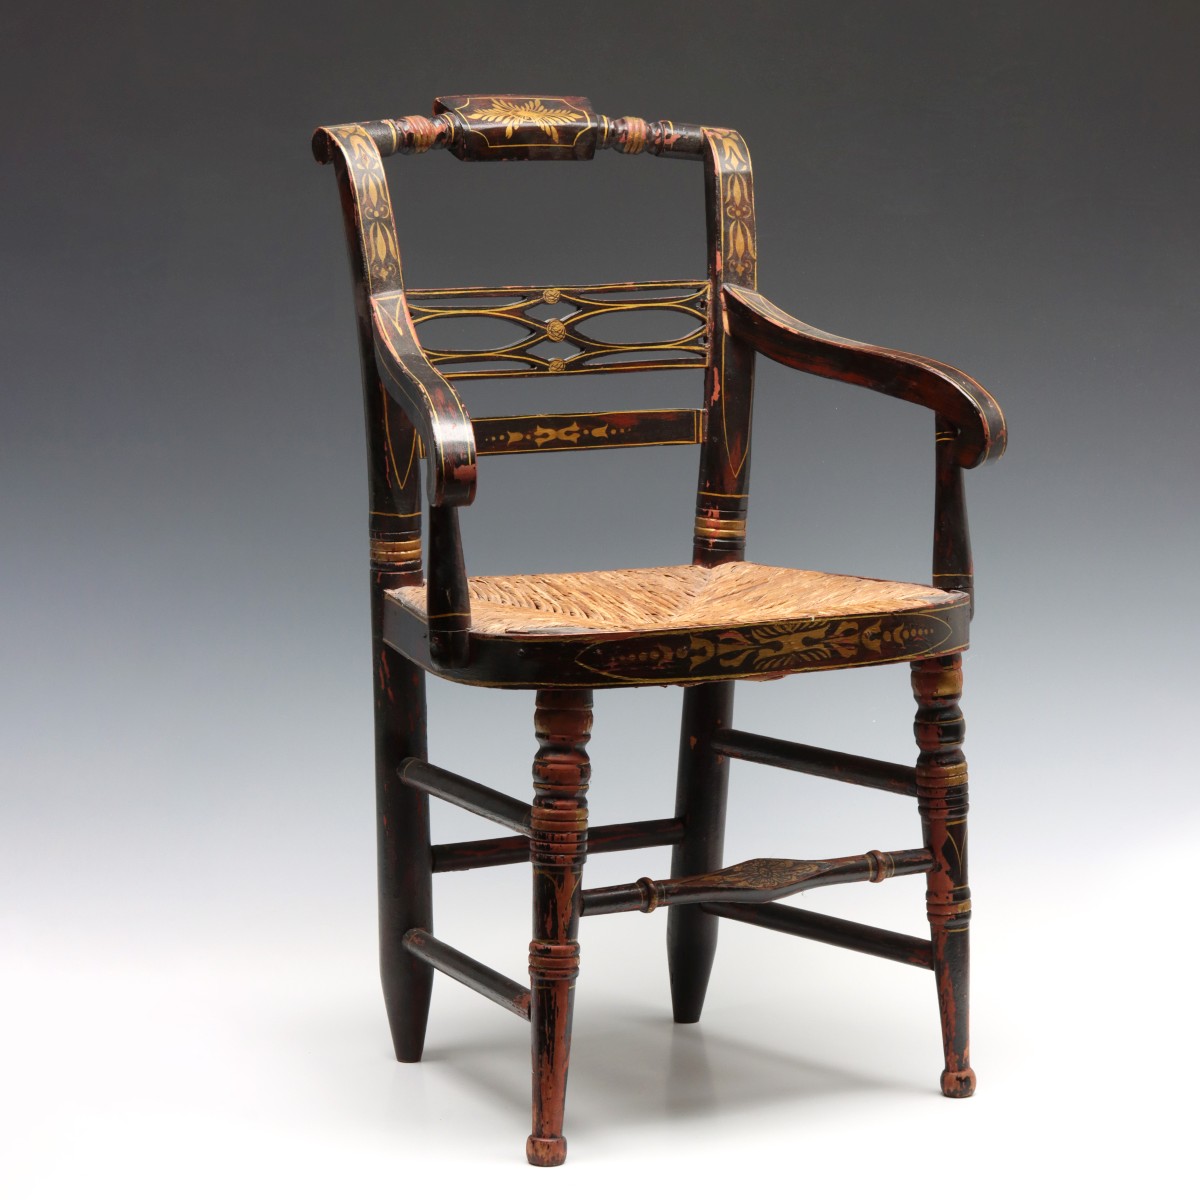 A 19C 'FANCY SHERATON' PAINT DECORATED CHILD'S CHAIR